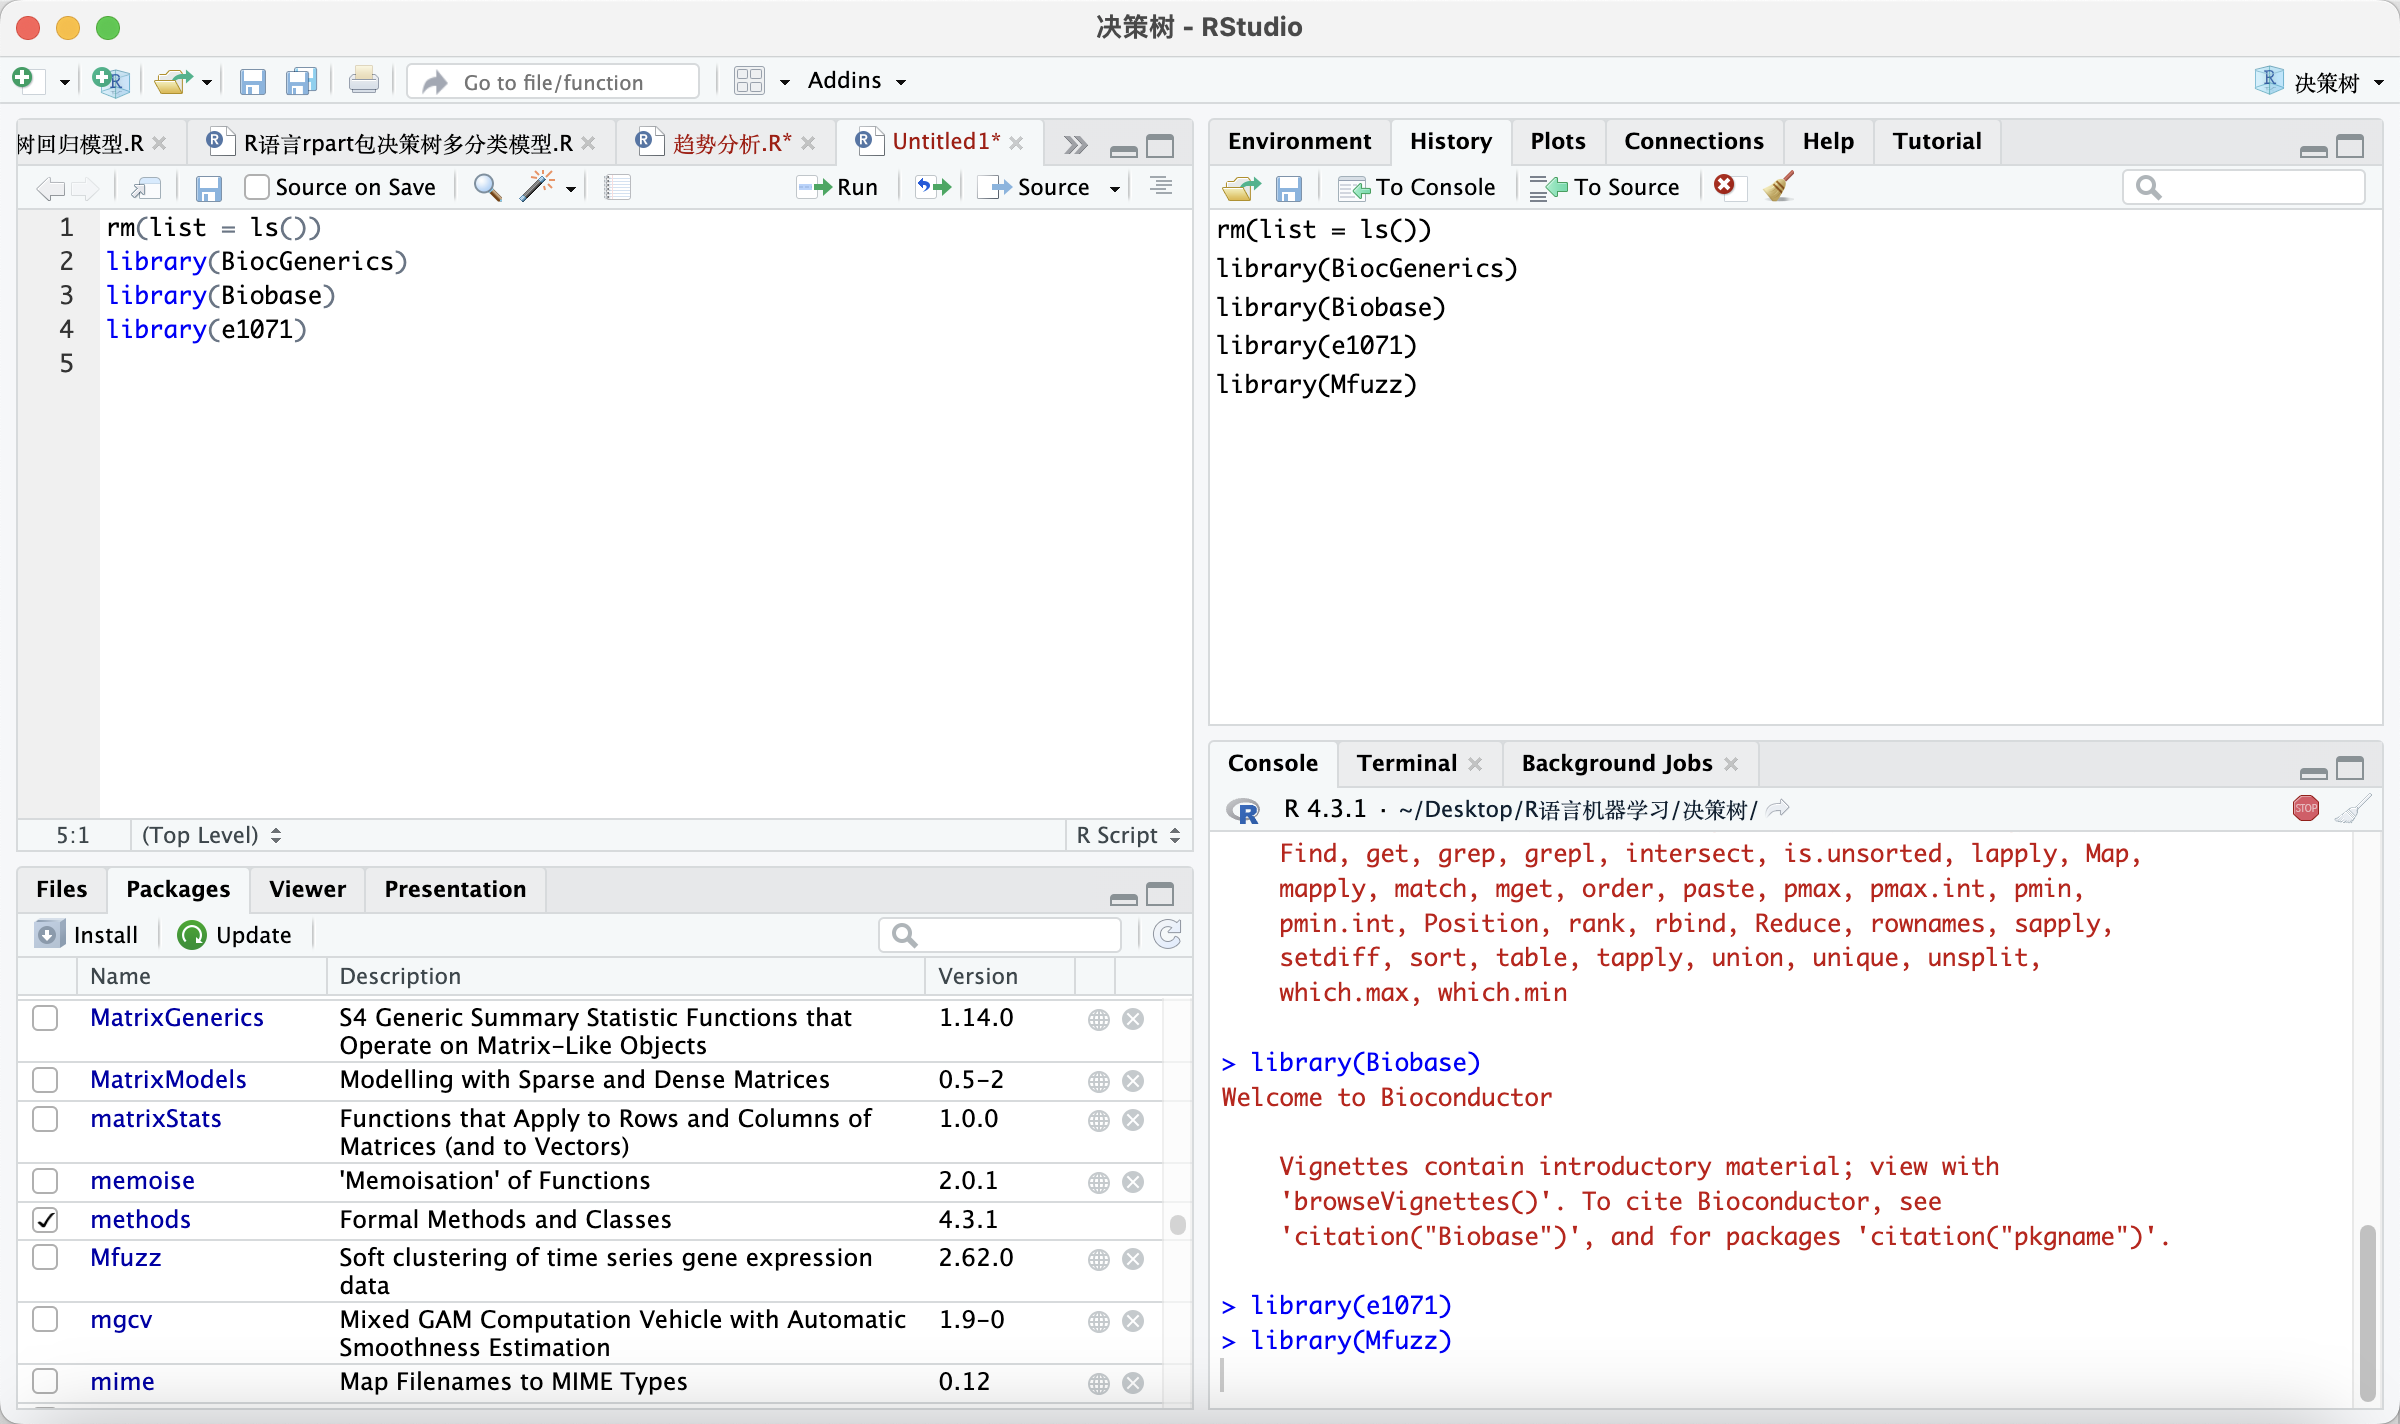 After Rstudio loads the Mfuzz package, the console area shows that the code keeps running 